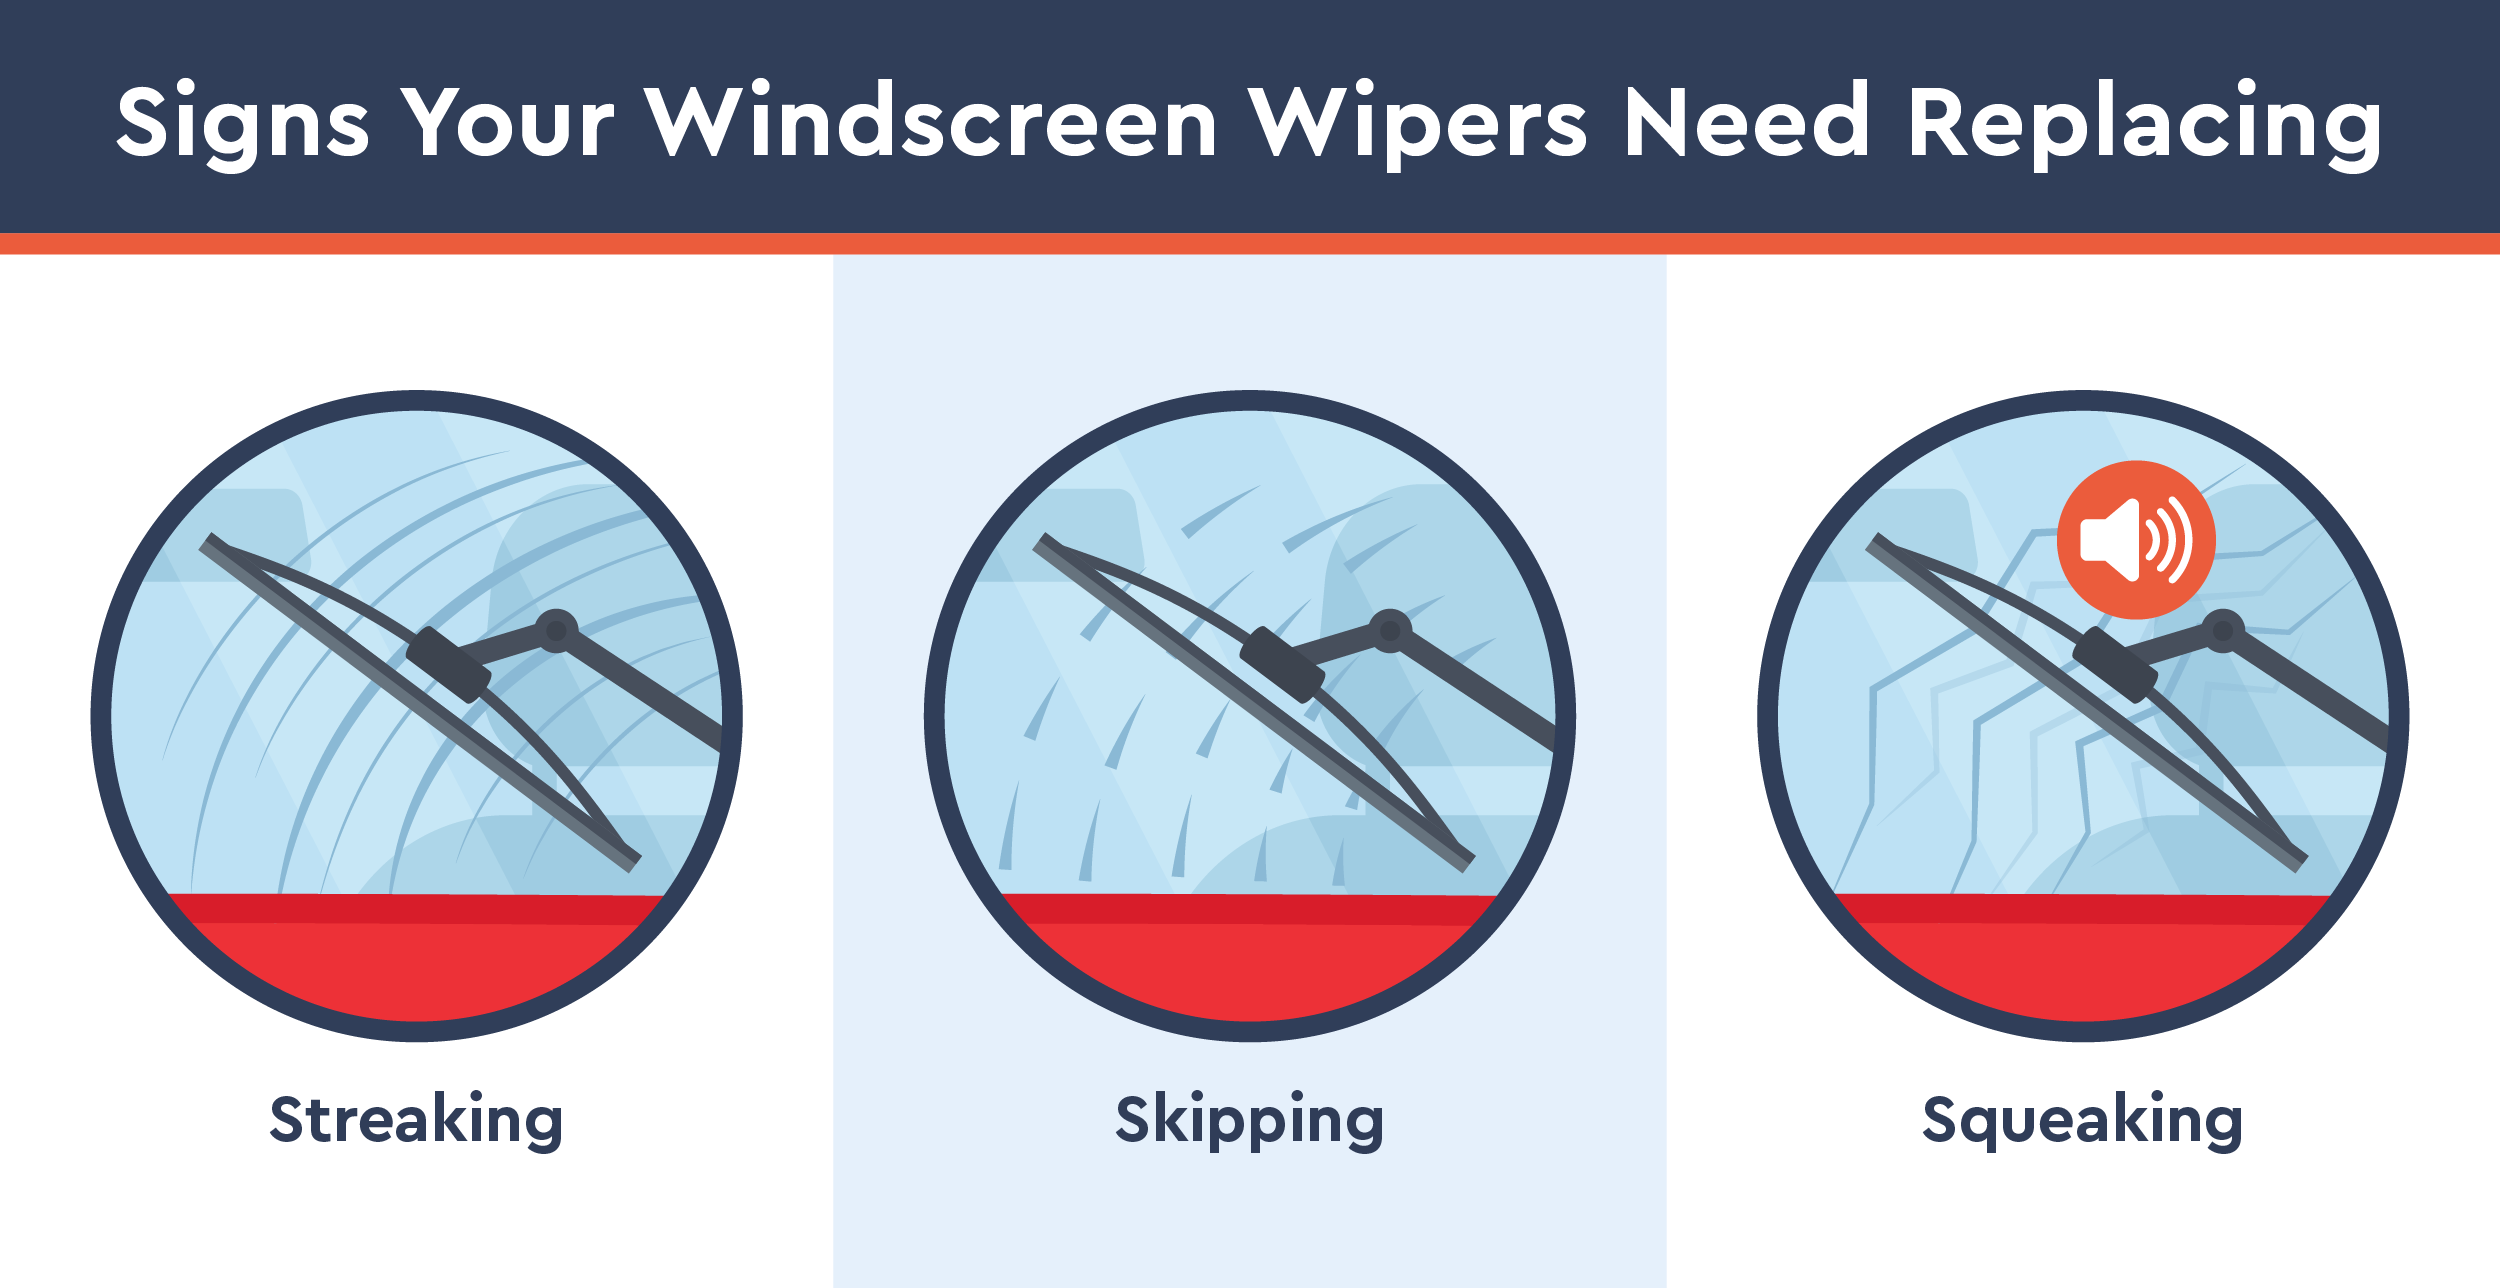 signs your windscreen wipers need replacing - streaking, skipping and squeaking